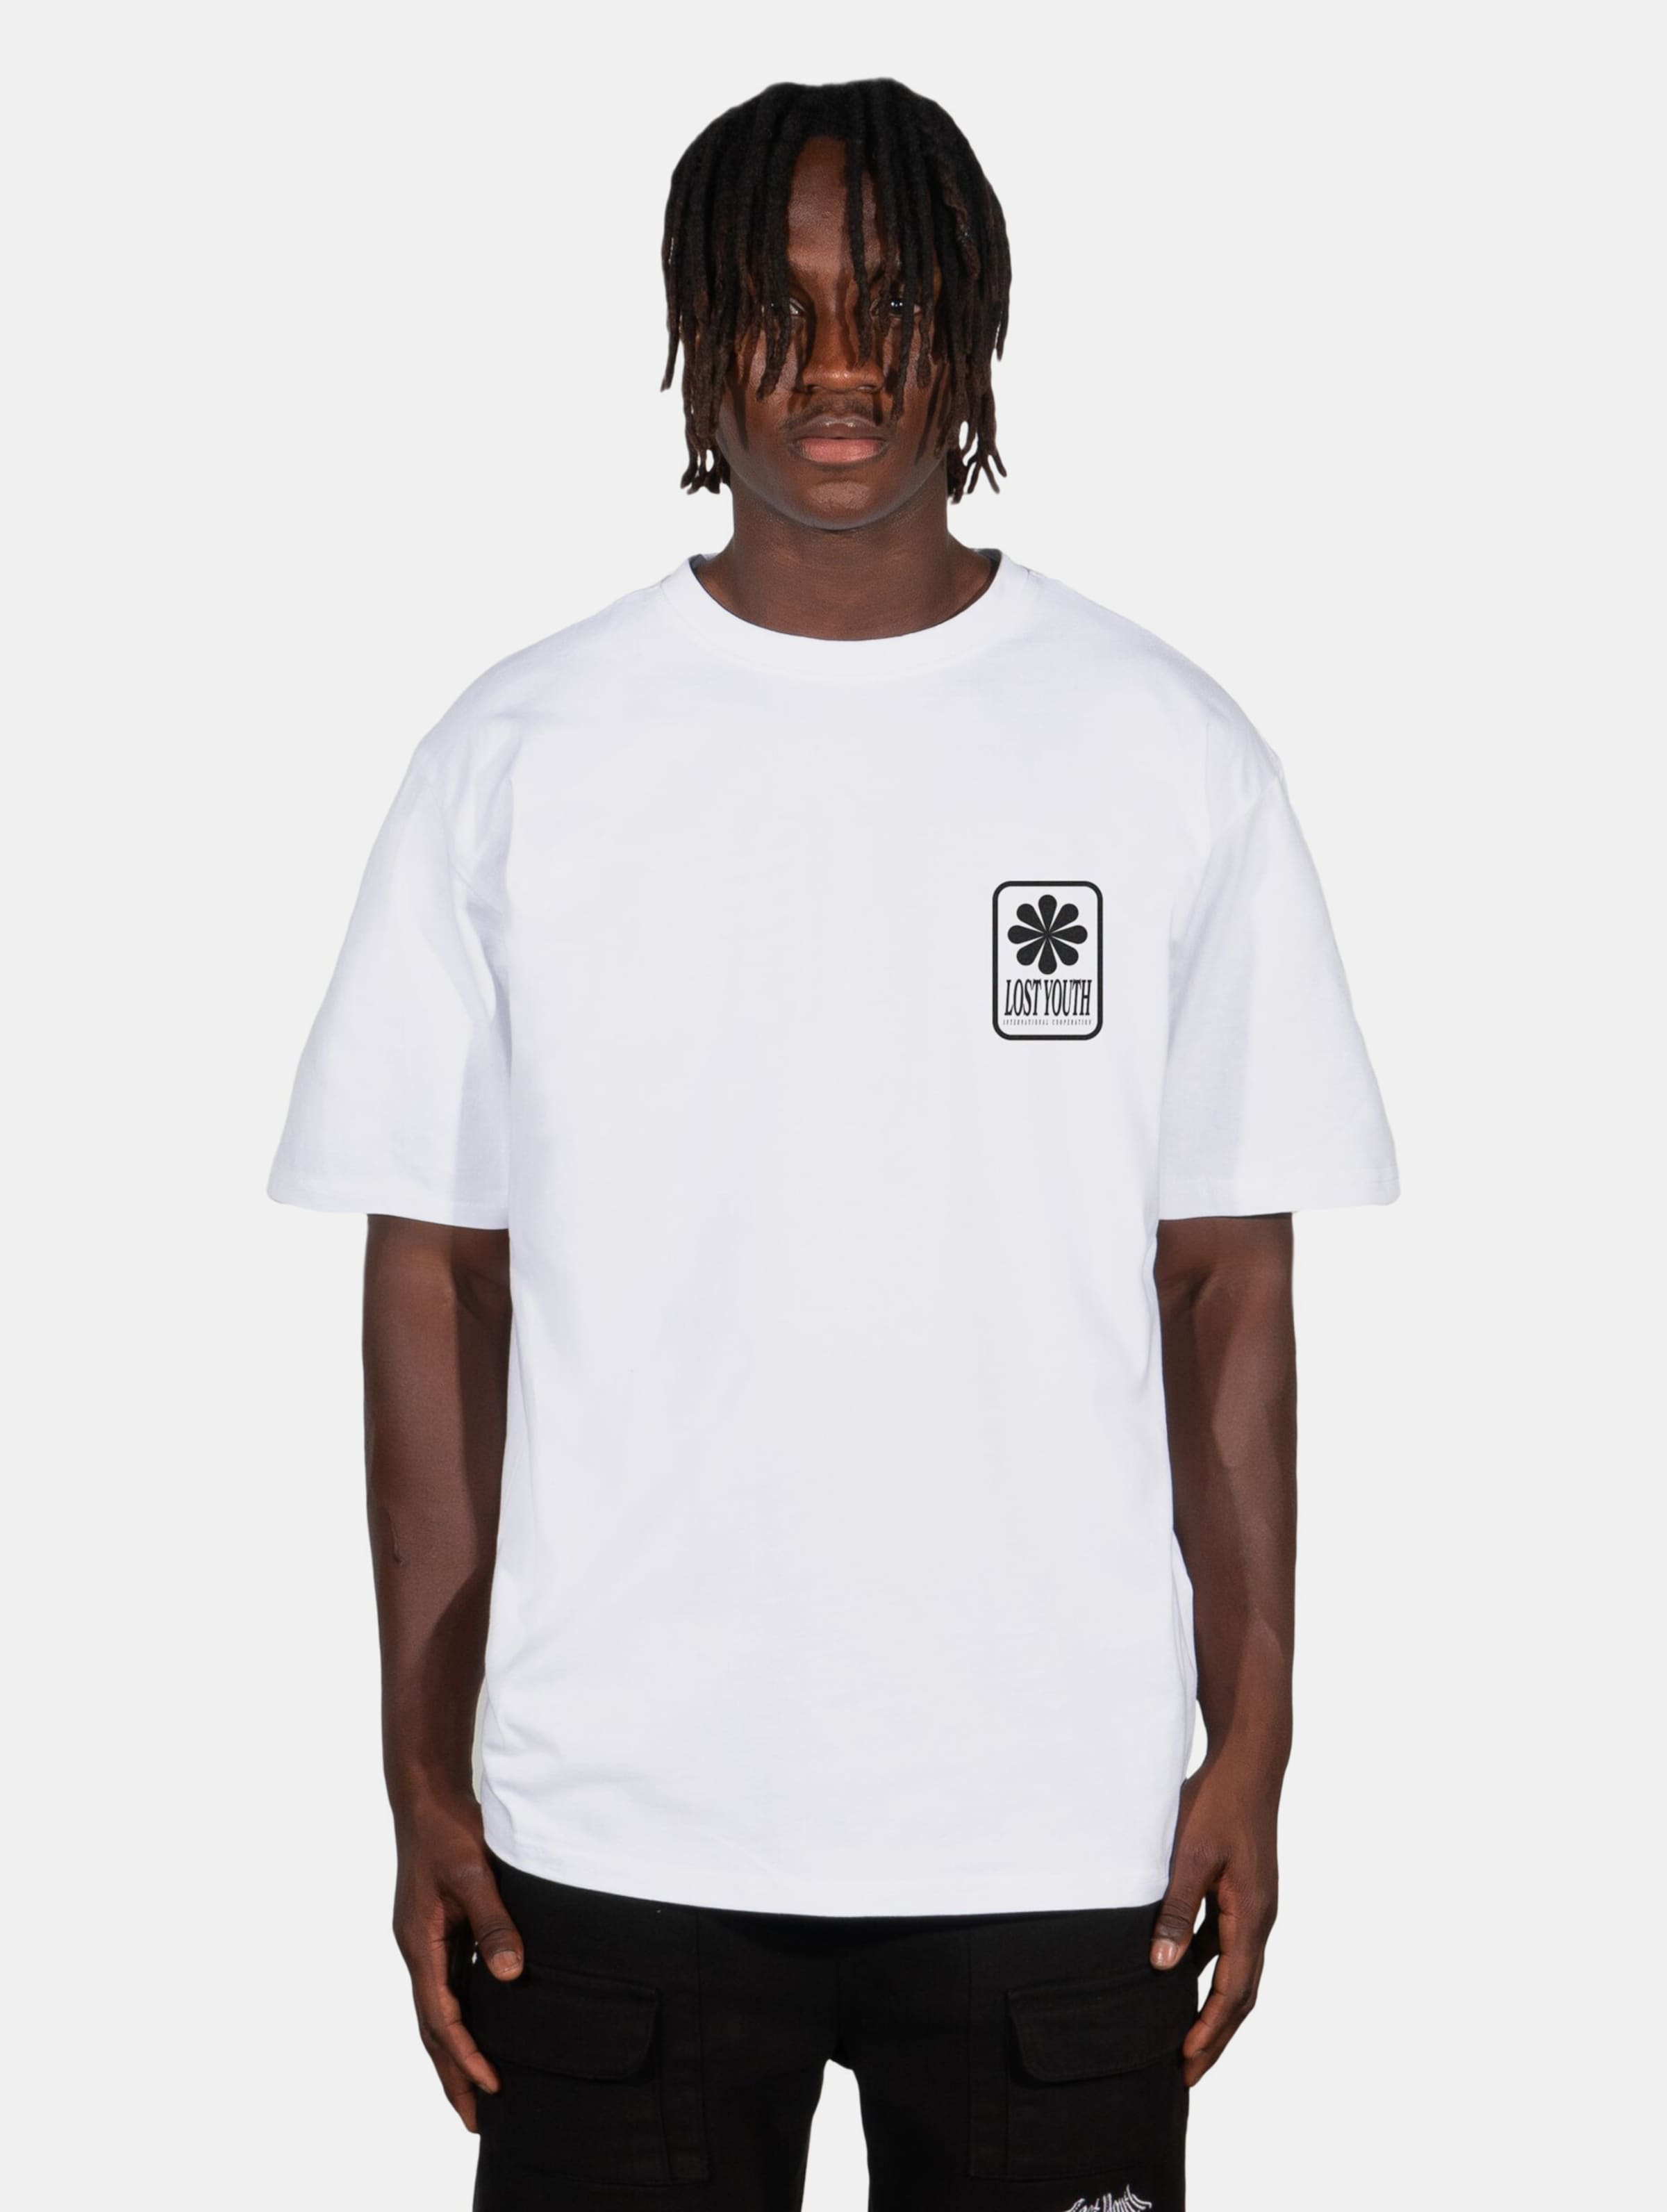 Lost Youth LY TEE- ICON V.4 Männer,Unisex op kleur wit, Maat M